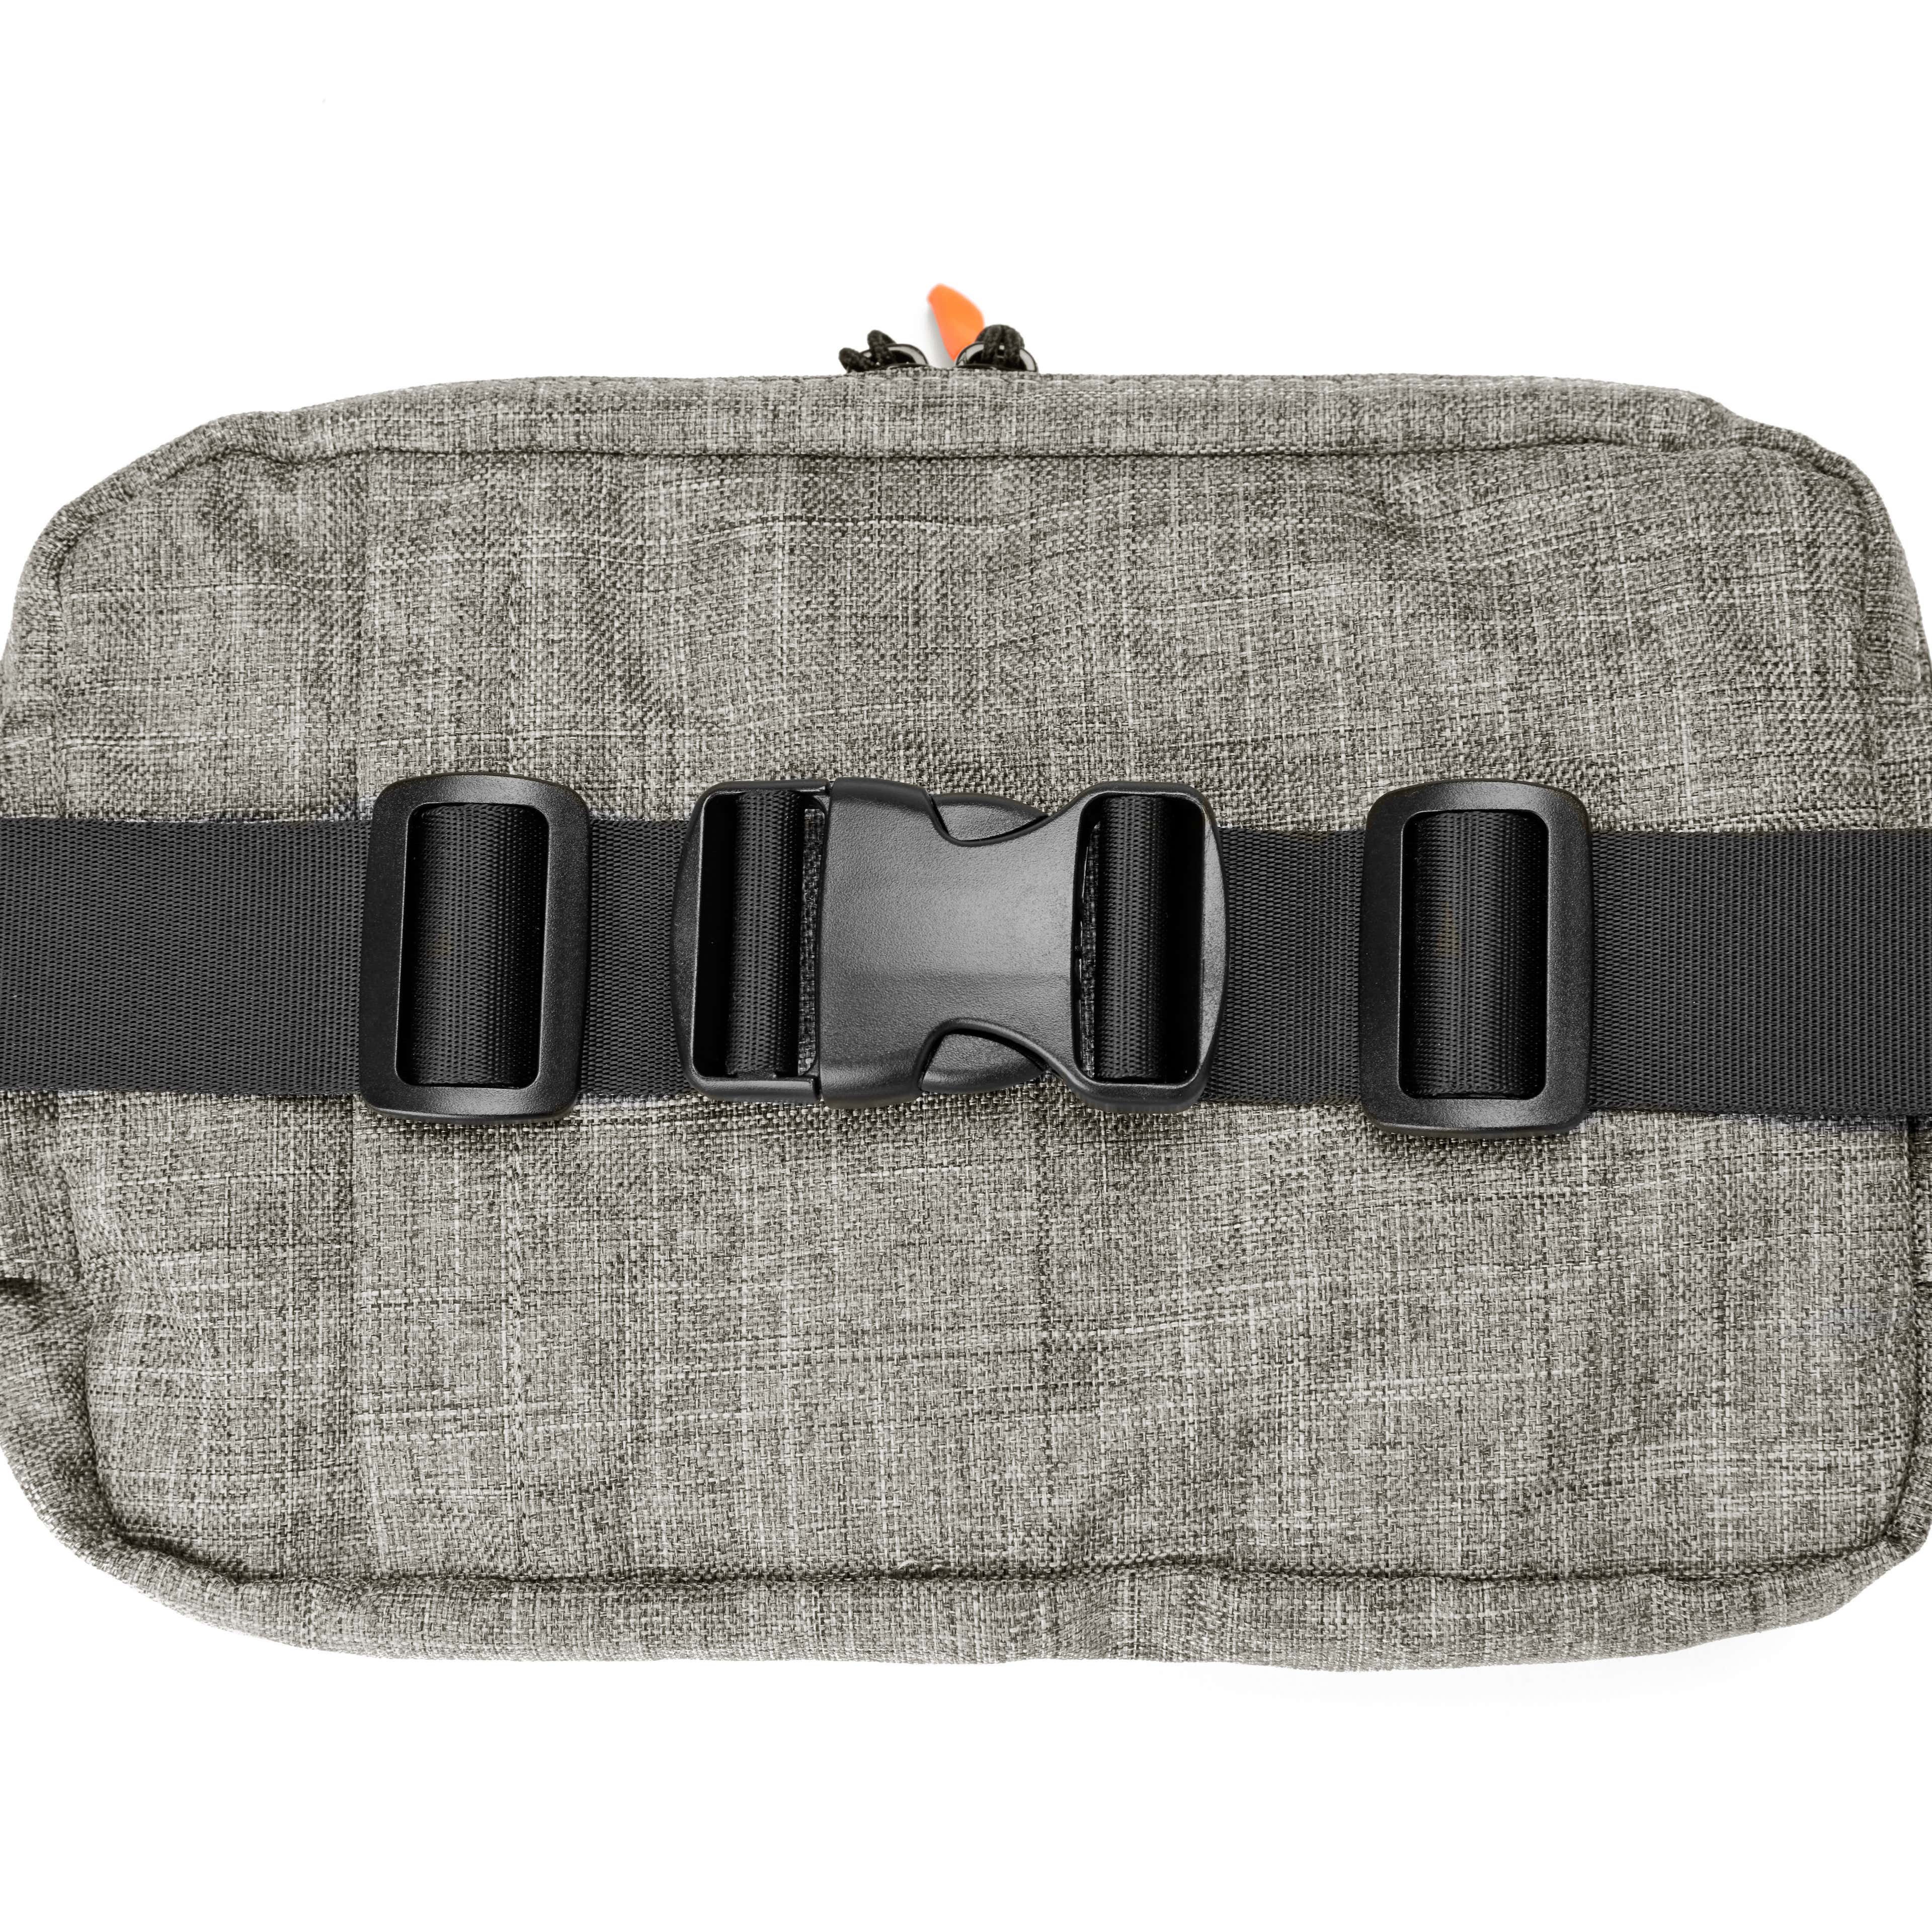 Lawson Grey Foldable Bum Bag – Recycled PET - 14 - gallery